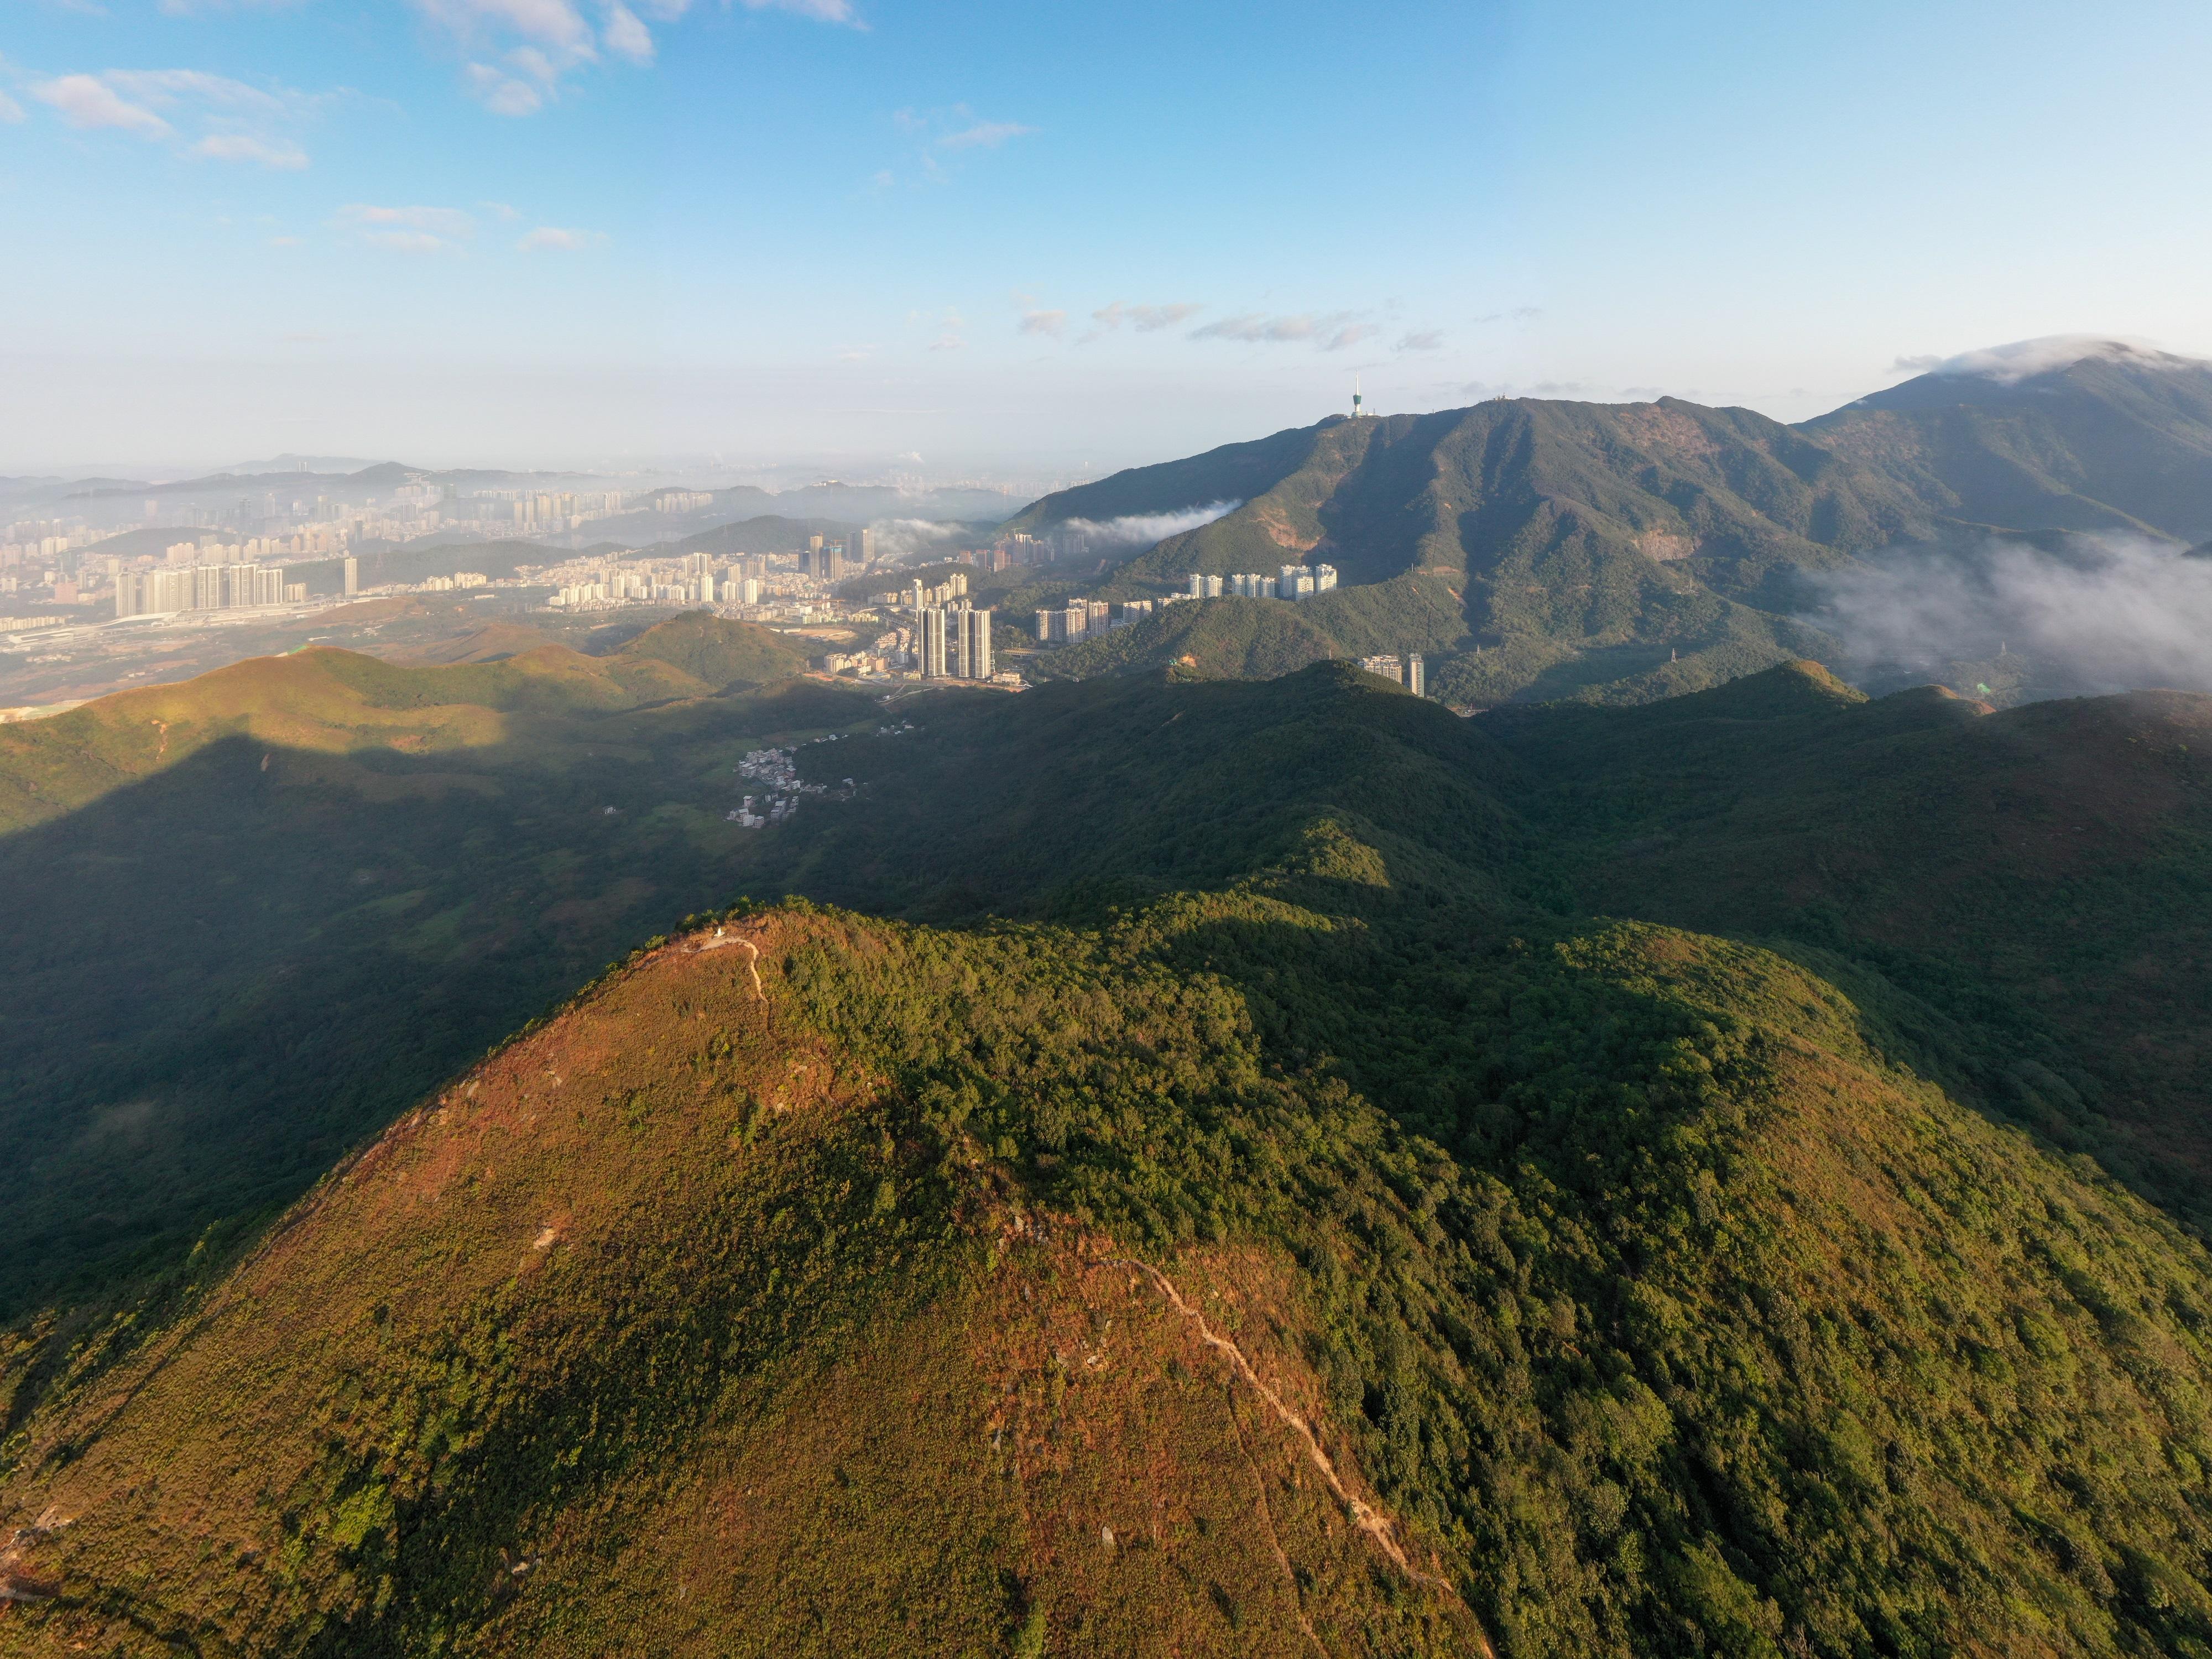 The Agriculture, Fisheries and Conservation Department announced today (March 1) that Robin's Nest Country Park was established the same day. Photo shows Robin's Nest and Shenzhen Wutong Mountain.

